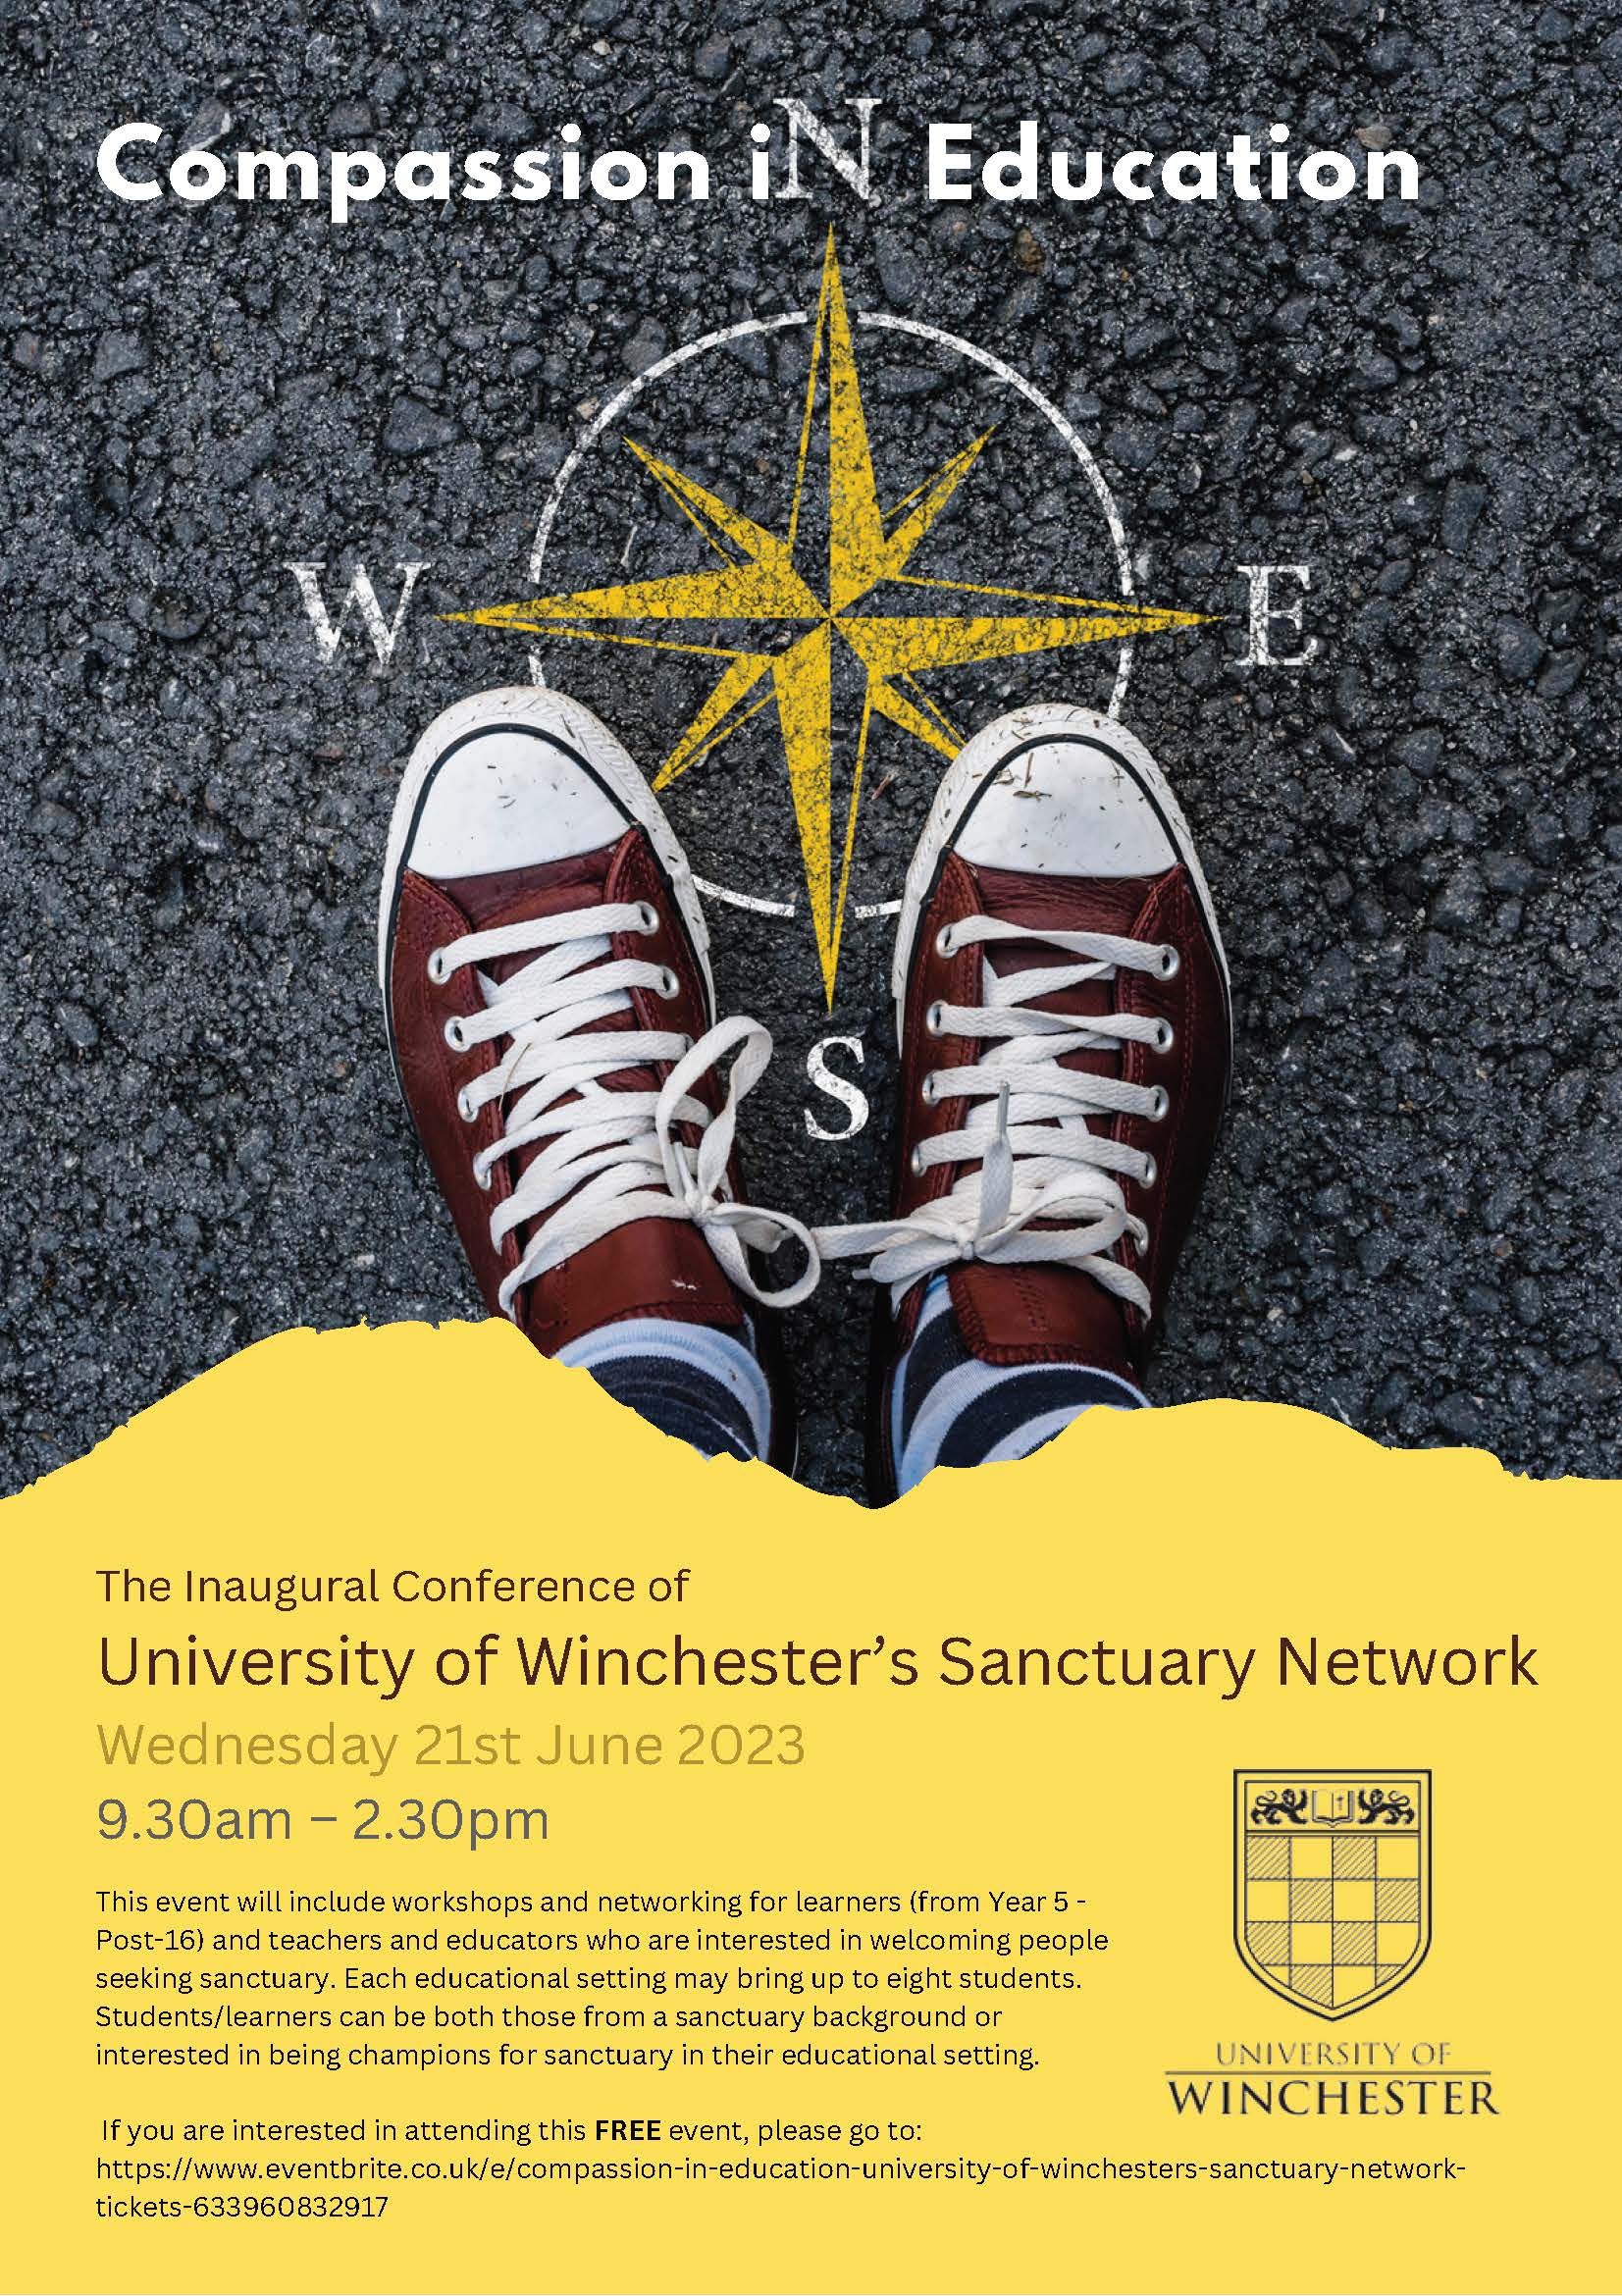 Compassion in Education: University of Winchester’s Sanctuary Network Inaugural Conference (Schools, Colleges and Universities)